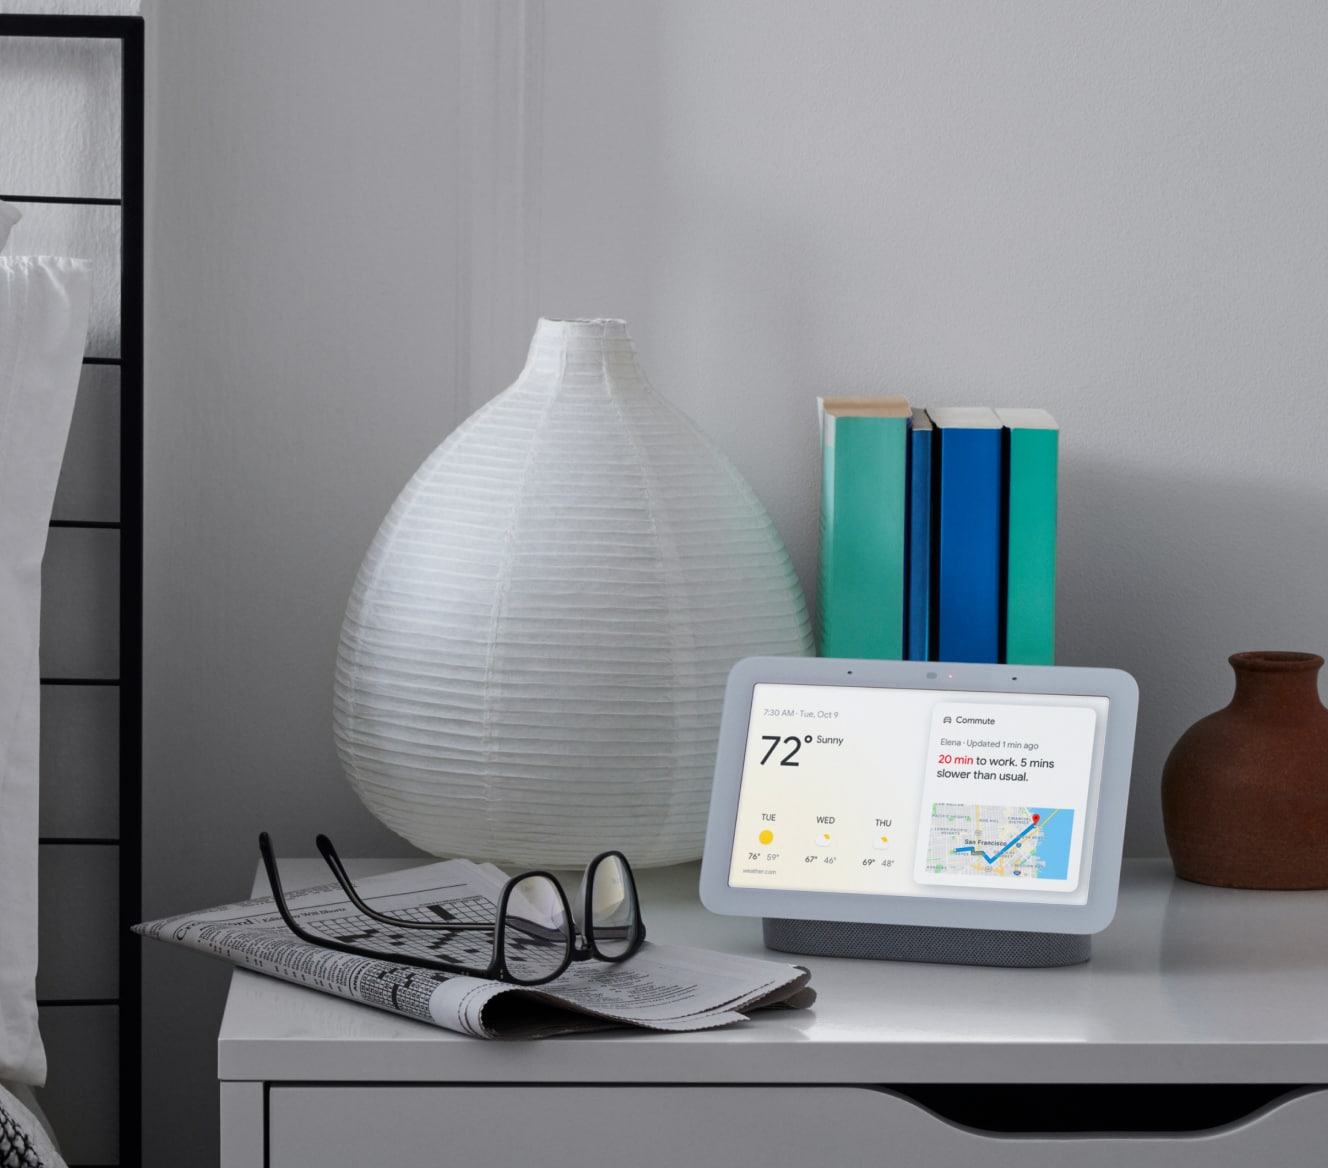 Google Nest Hub 2nd Gen on a bedside table displaying the weather and other stats